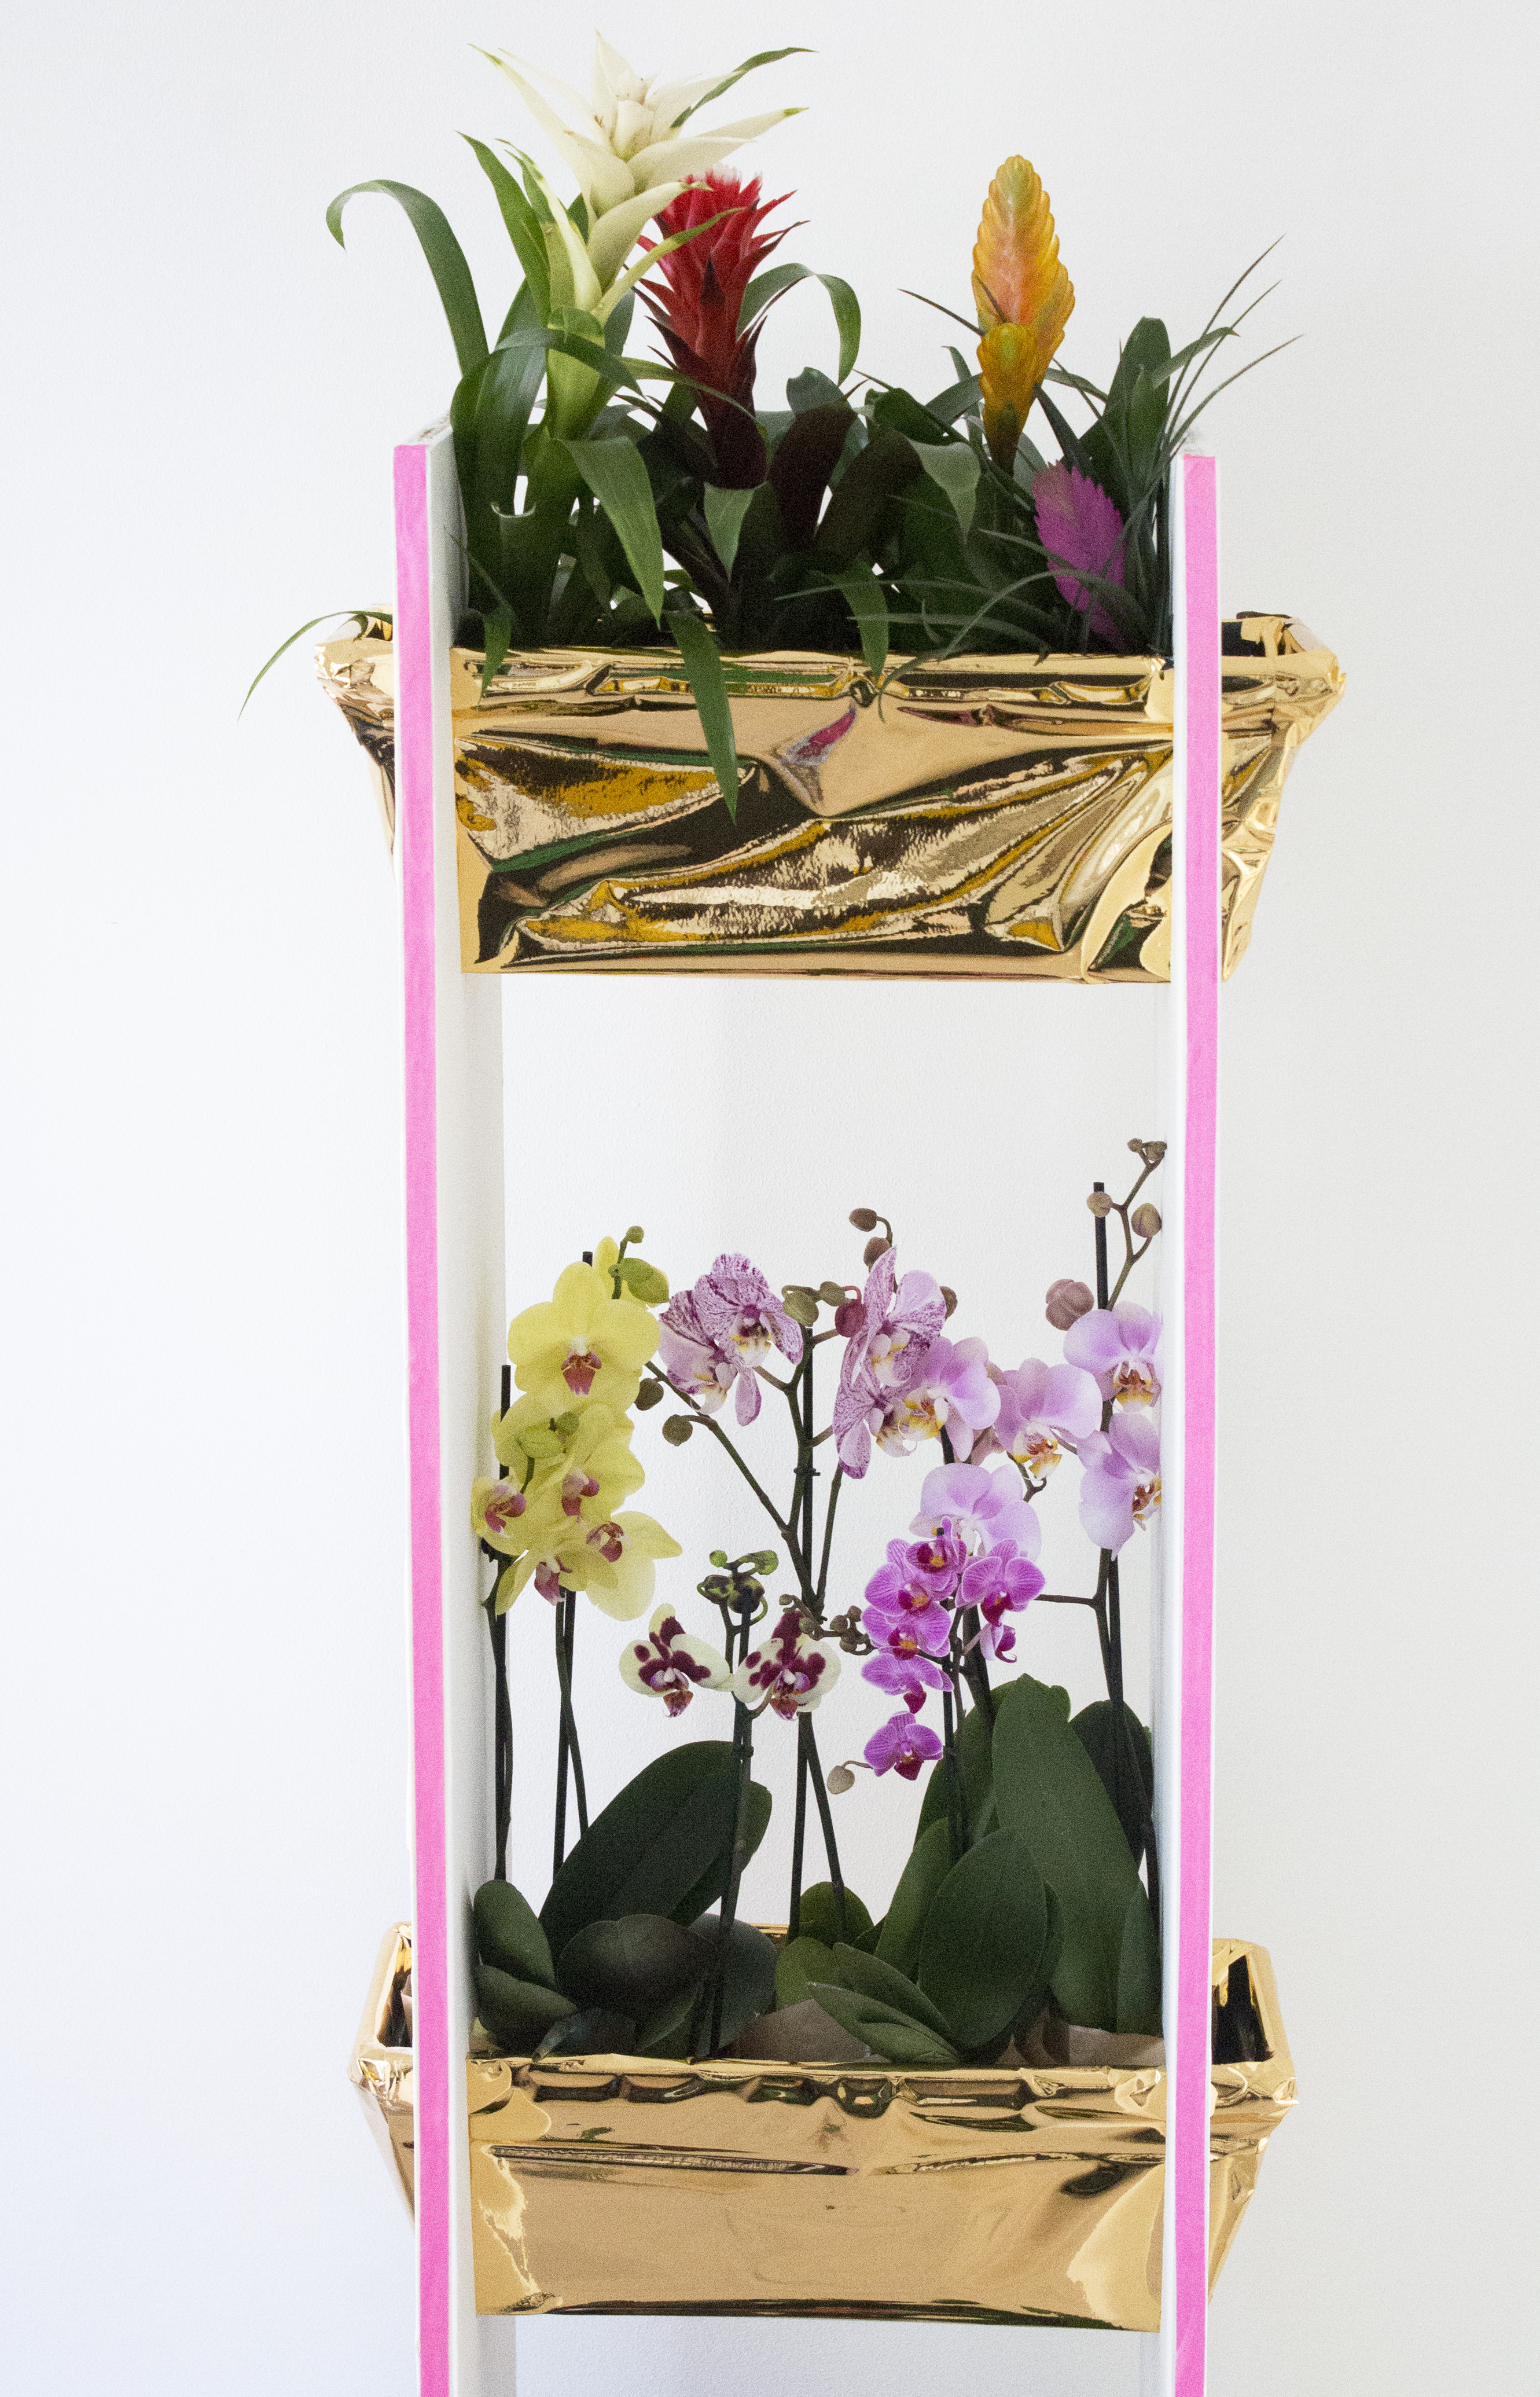 Tropical-plant-stand-DIY-photo-by-Geraldine-Tan-Little-Big-Bell